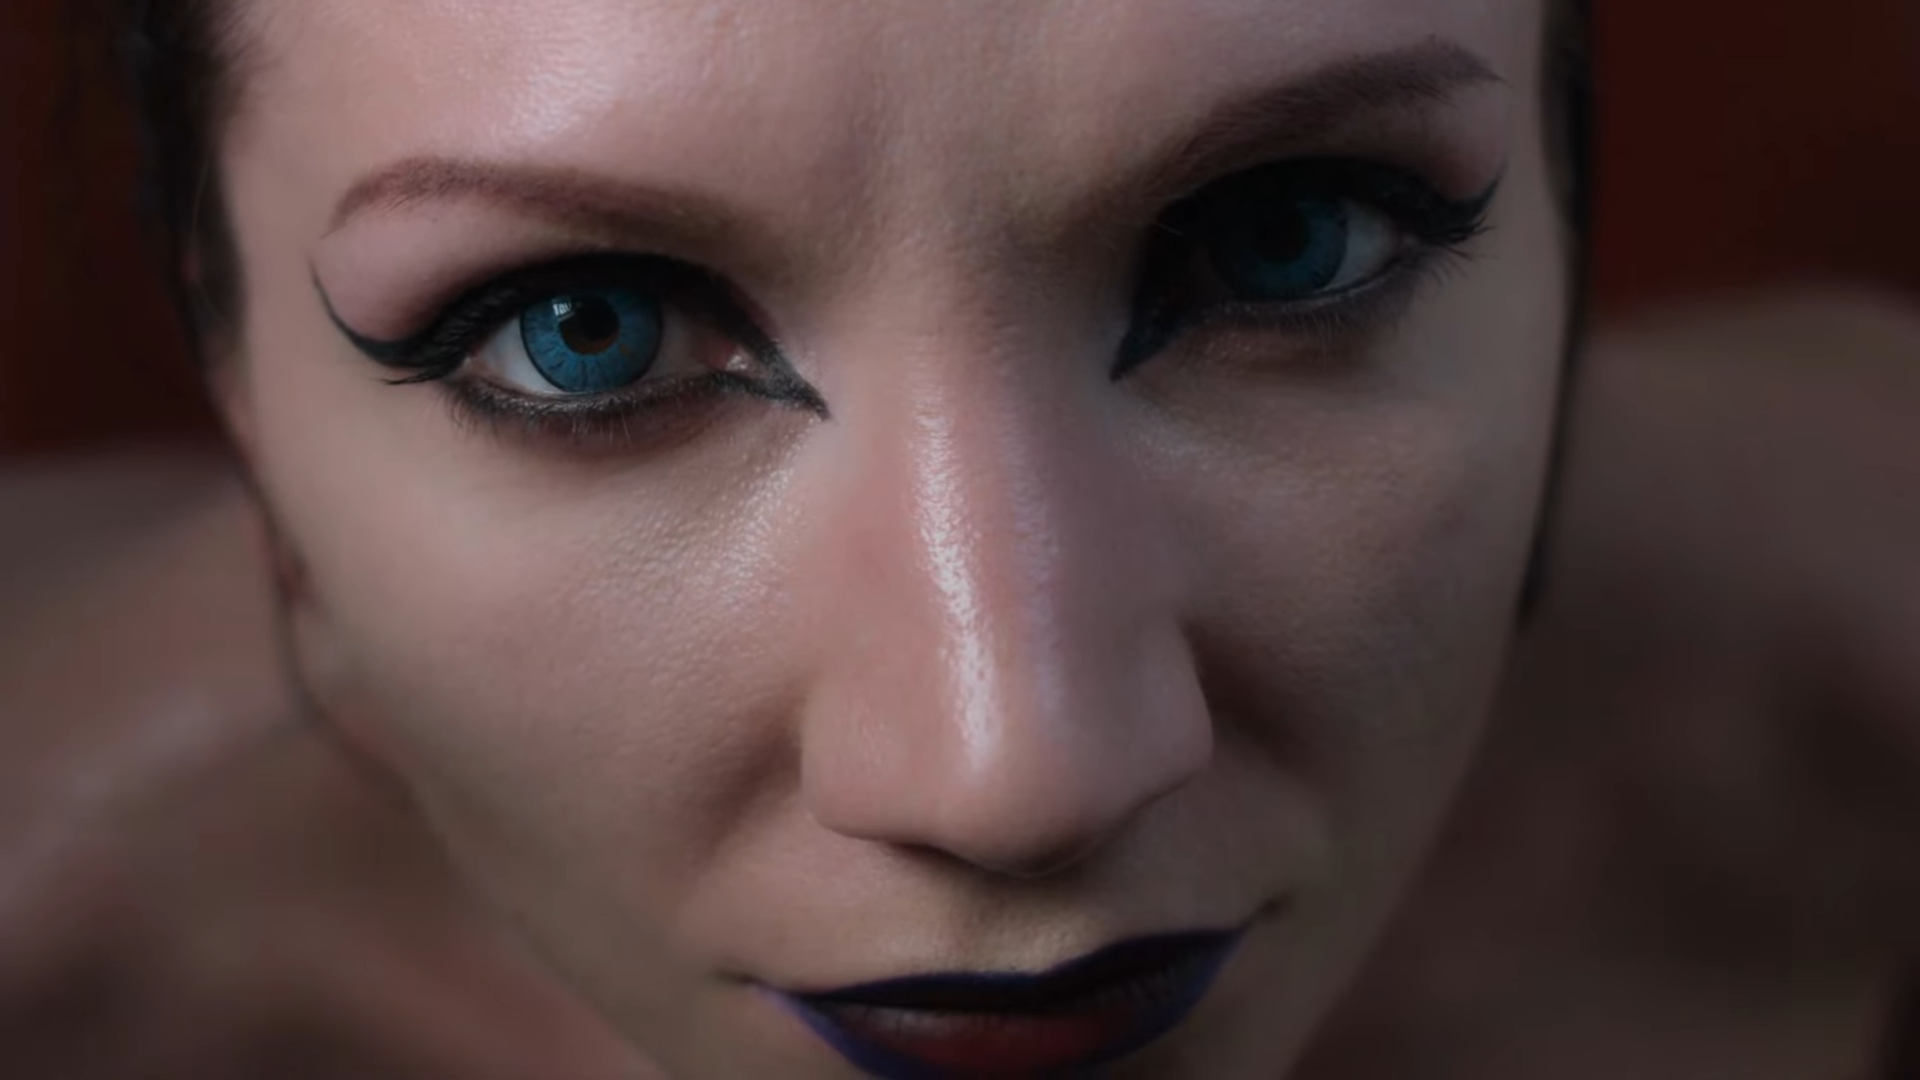 Image of the mysterious femme fatale from Meersein's new video "Haunting"